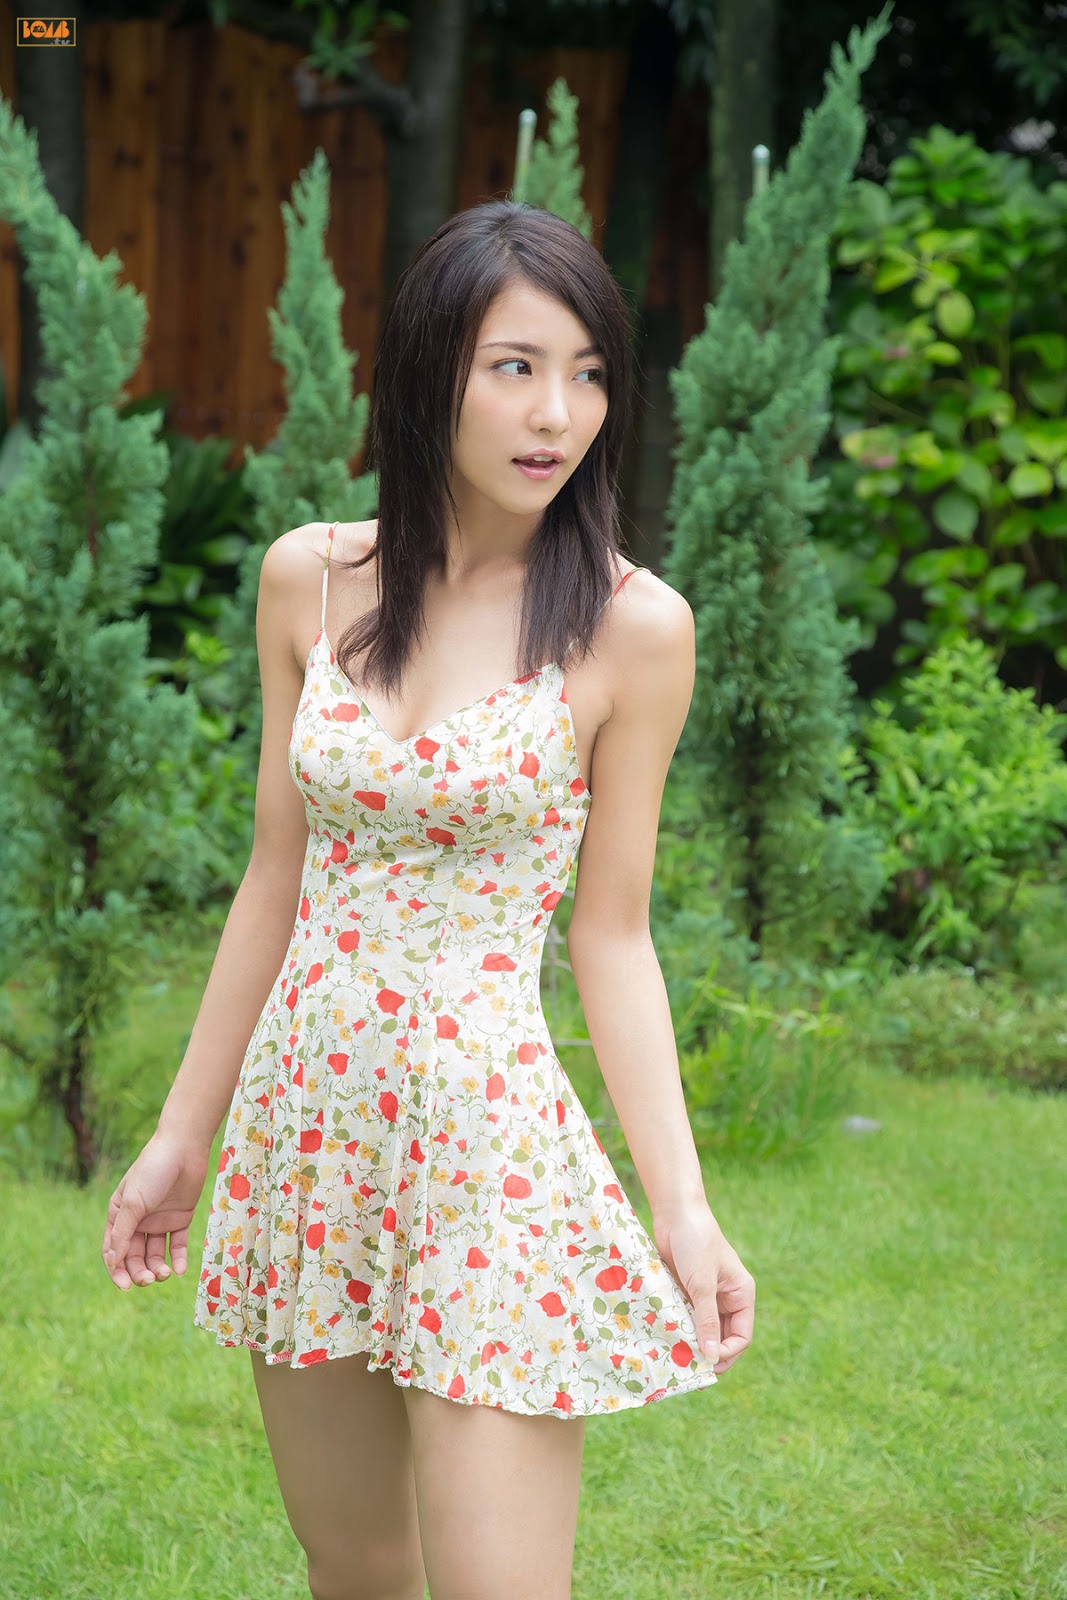 Asian Teen Free Tubes Look Excite And Delight Asian Teen